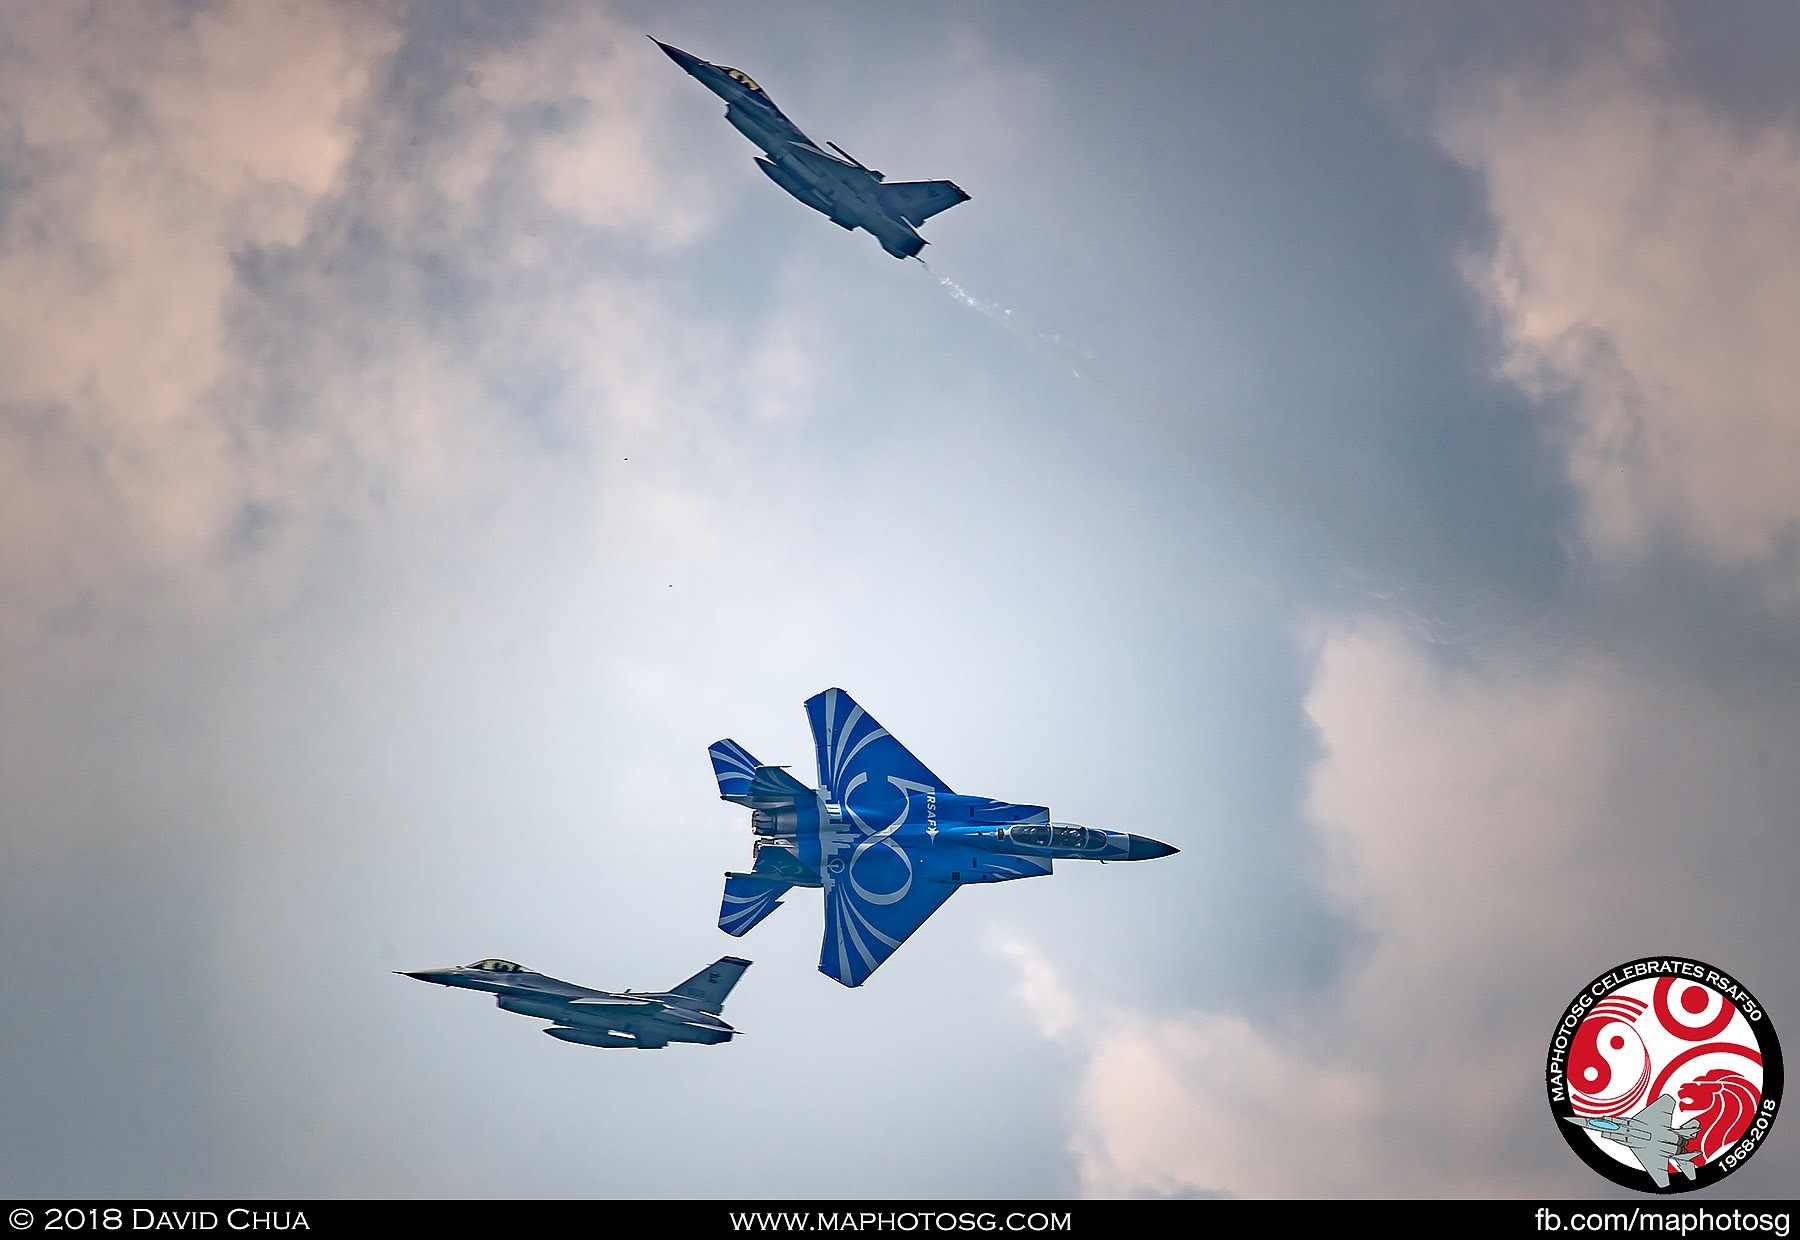 High Speed Pass – The F-15SG passes the two F-16Cs head on while one of the F-16C performs a muscle climb.